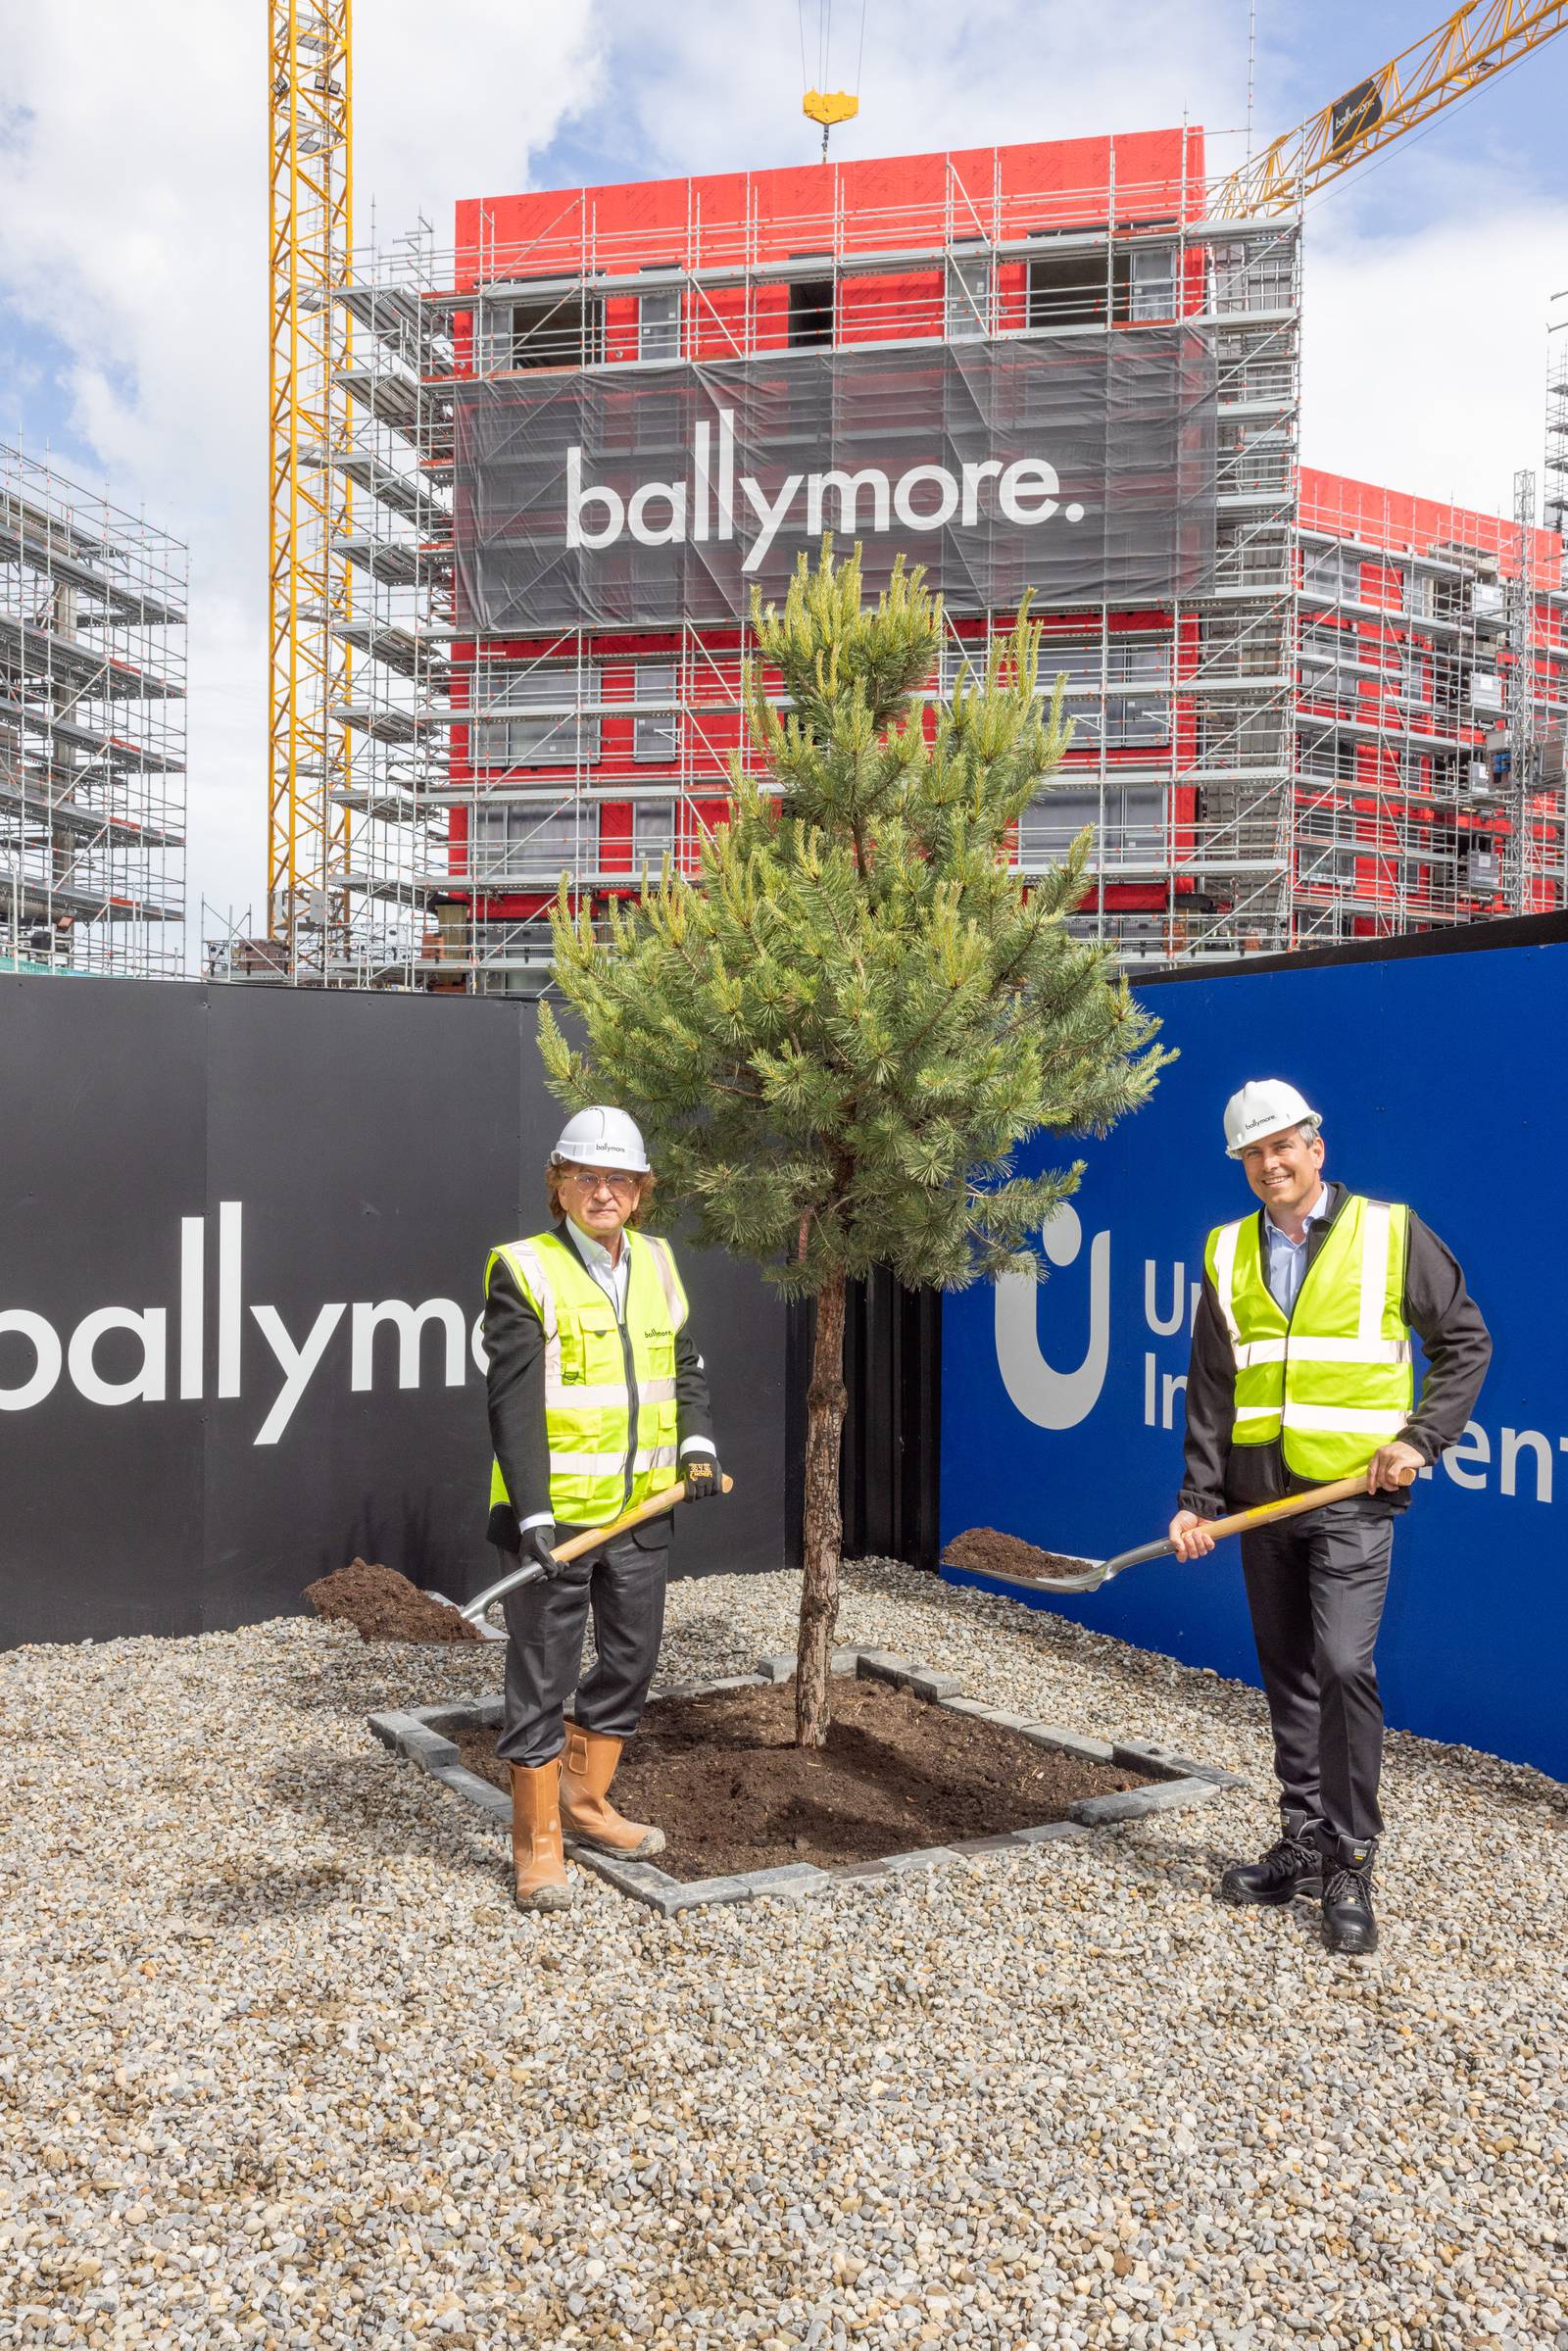 A sustainability first; Ballymore uses low-carbon technology in 8th Lock development